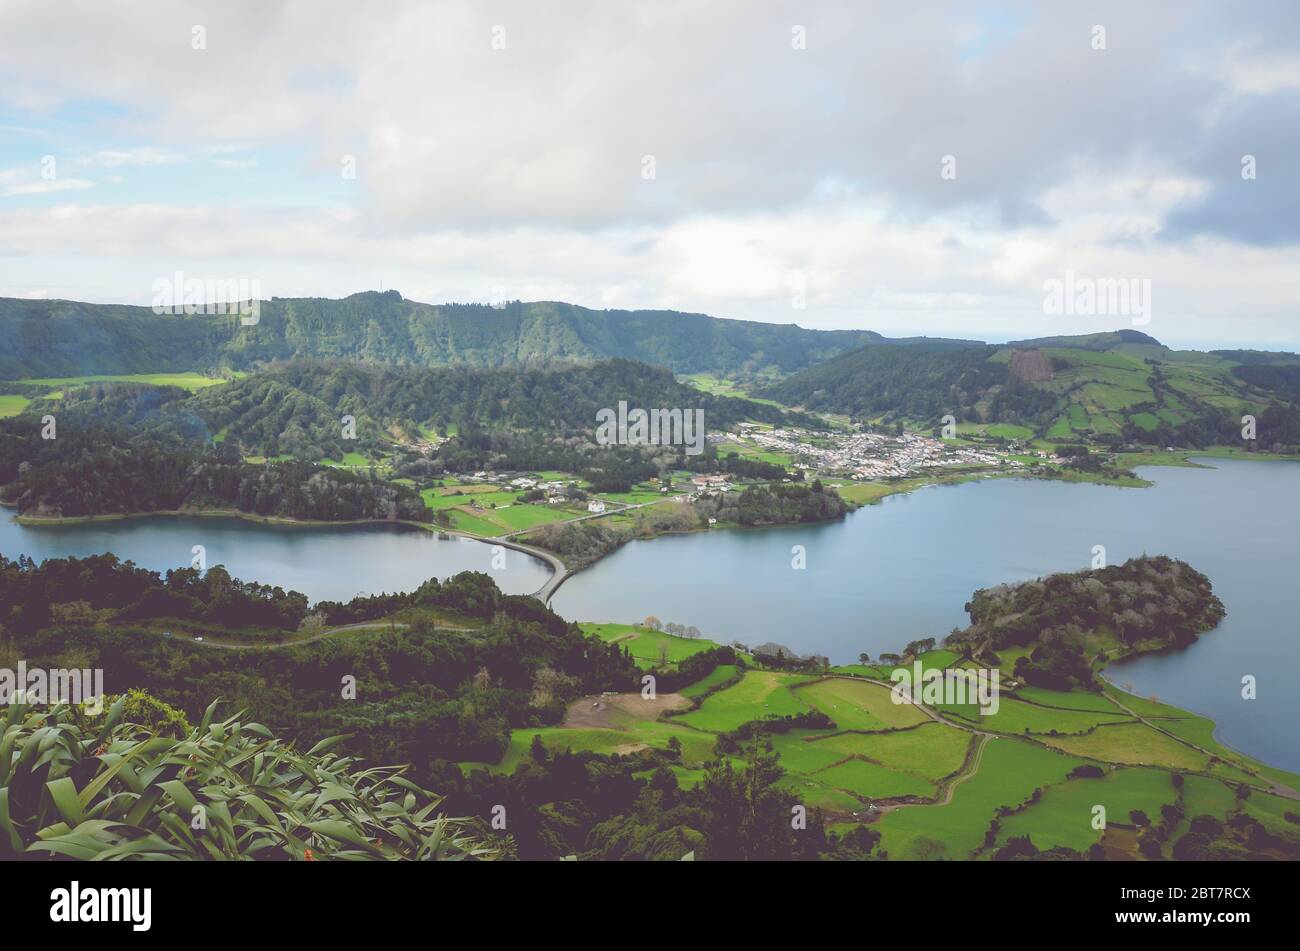 Amazing view of the Lagoa Azul and village Sete Cidades from the Miradouro do Cerrado das Freiras viewpoint in Azores, Portugal. Lakes surrounded by green fields and forest. Horizontal photo. Stock Photo